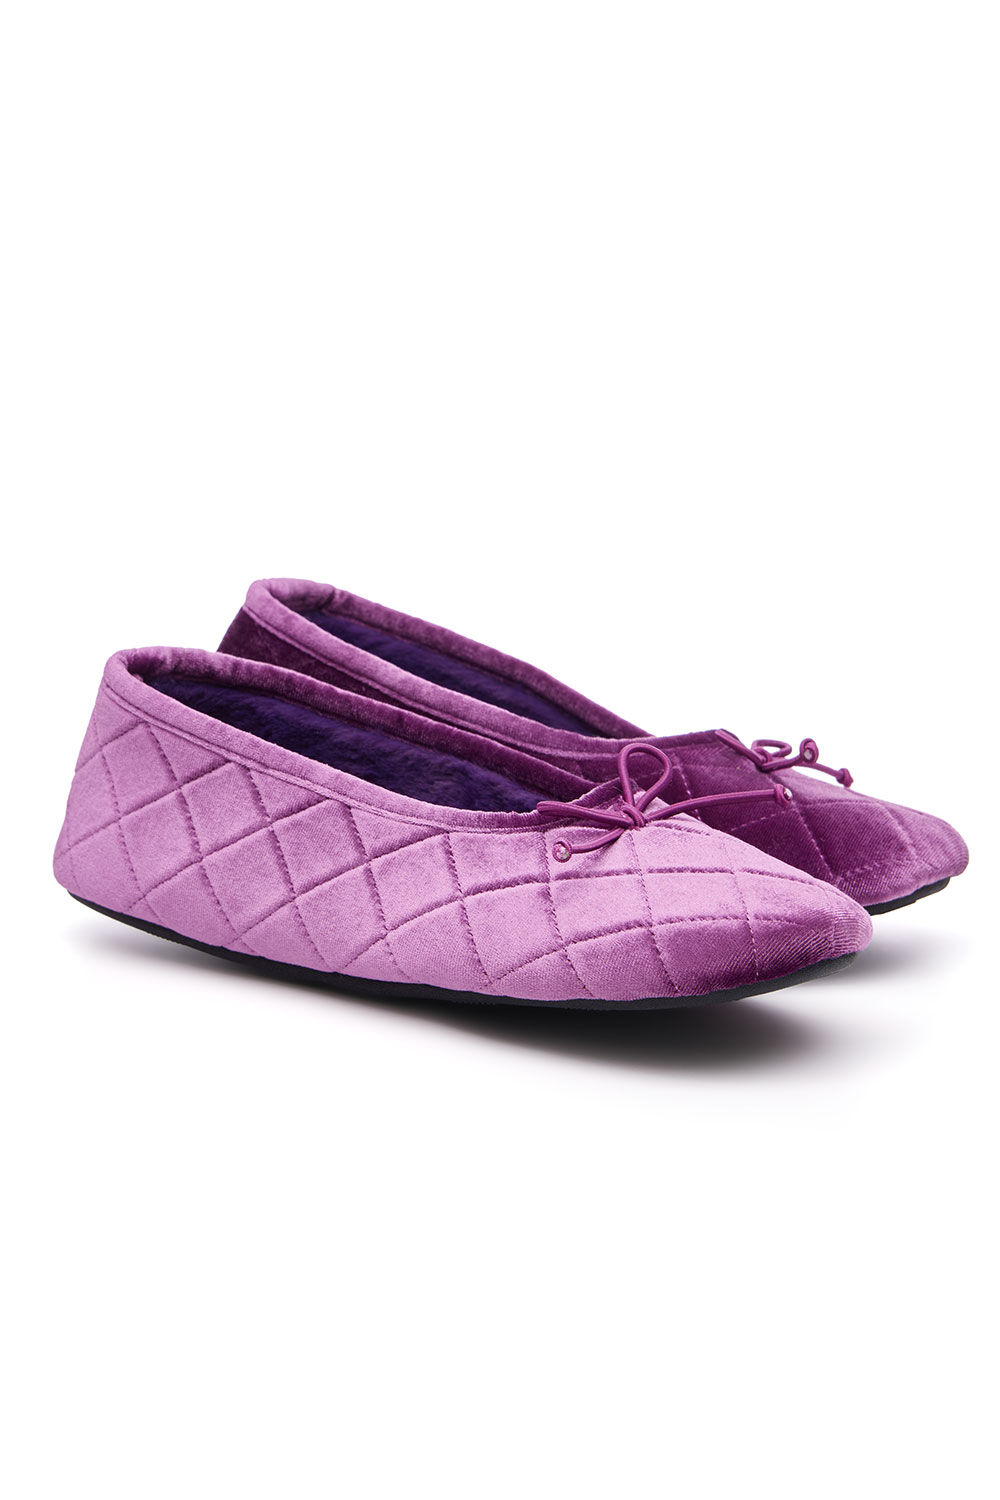 Bonmarche Magenta Velvet Faux Fur Lined Slippers With Bow Detail, Size: 3